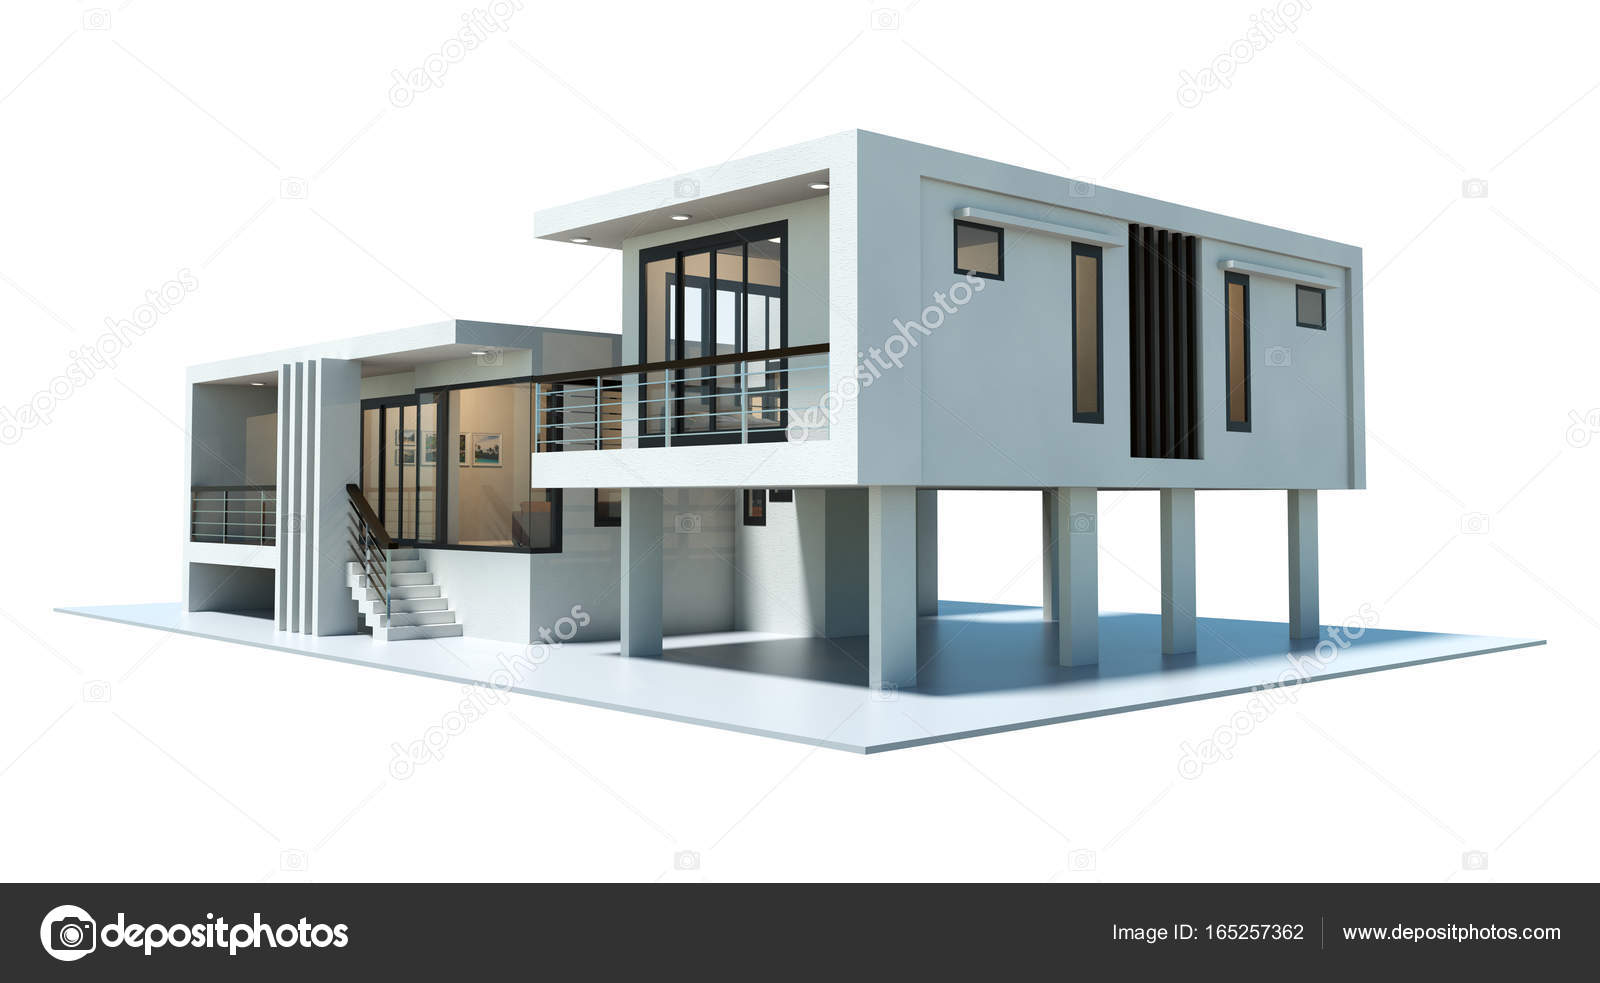  3d  modern house  rendering  isolated on white background 